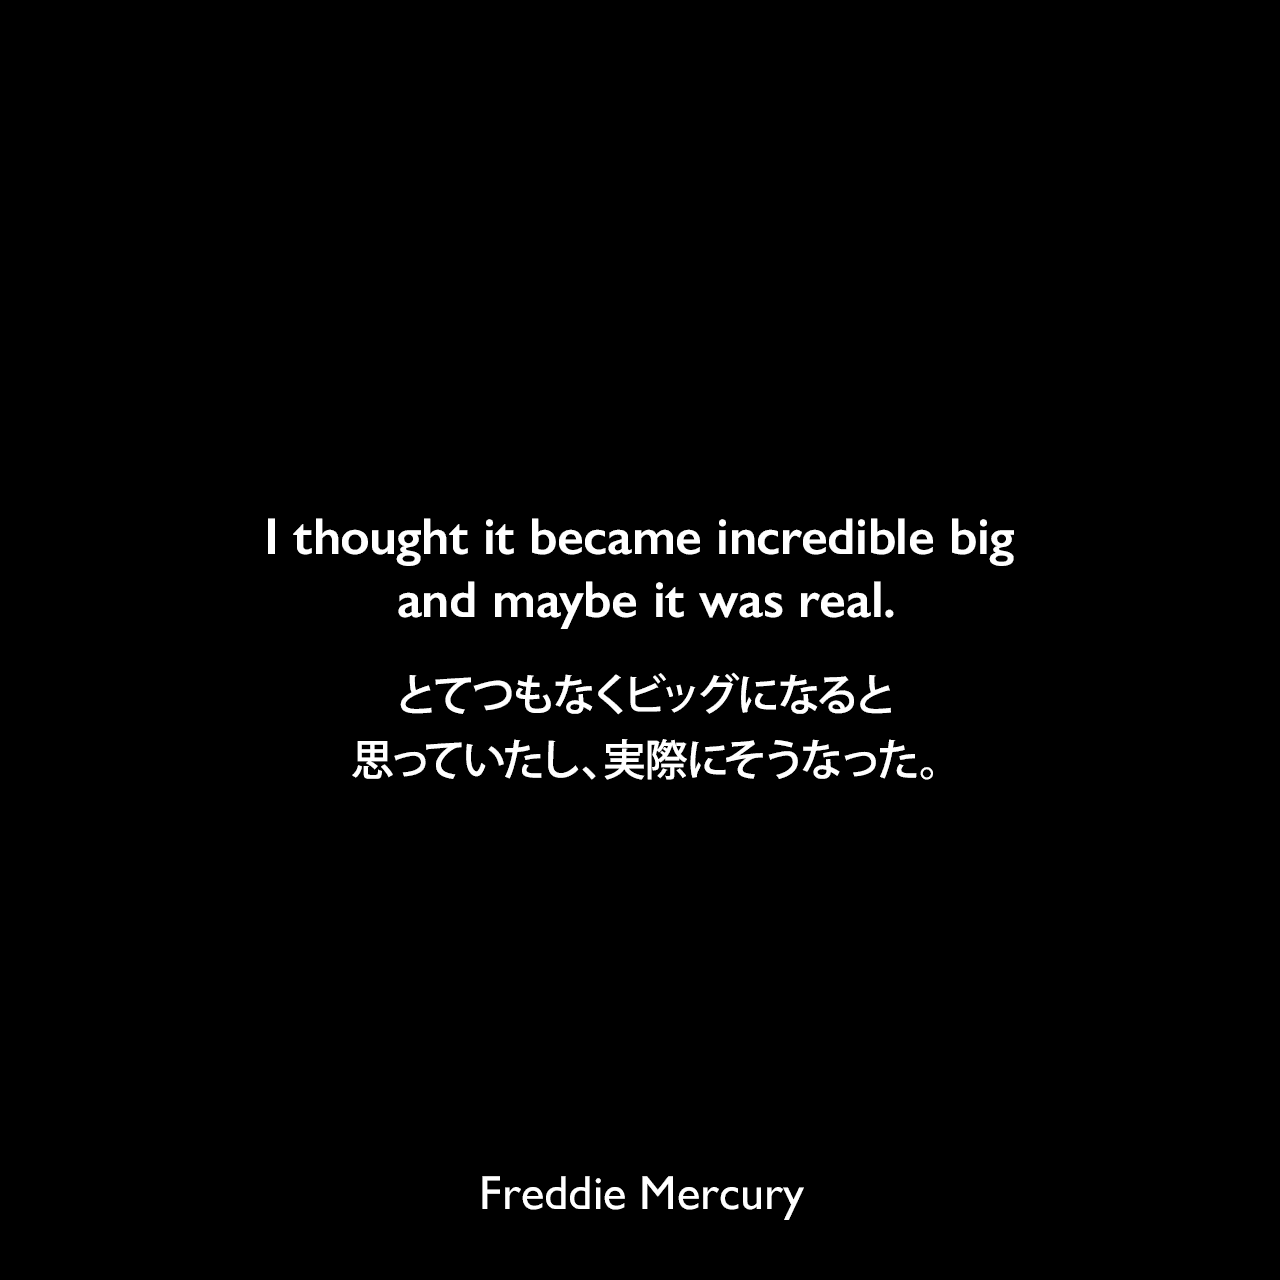 I thought it became incredible big and maybe it was real.とてつもなくビッグになると思っていたし、実際にそうなった。Freddie Mercury